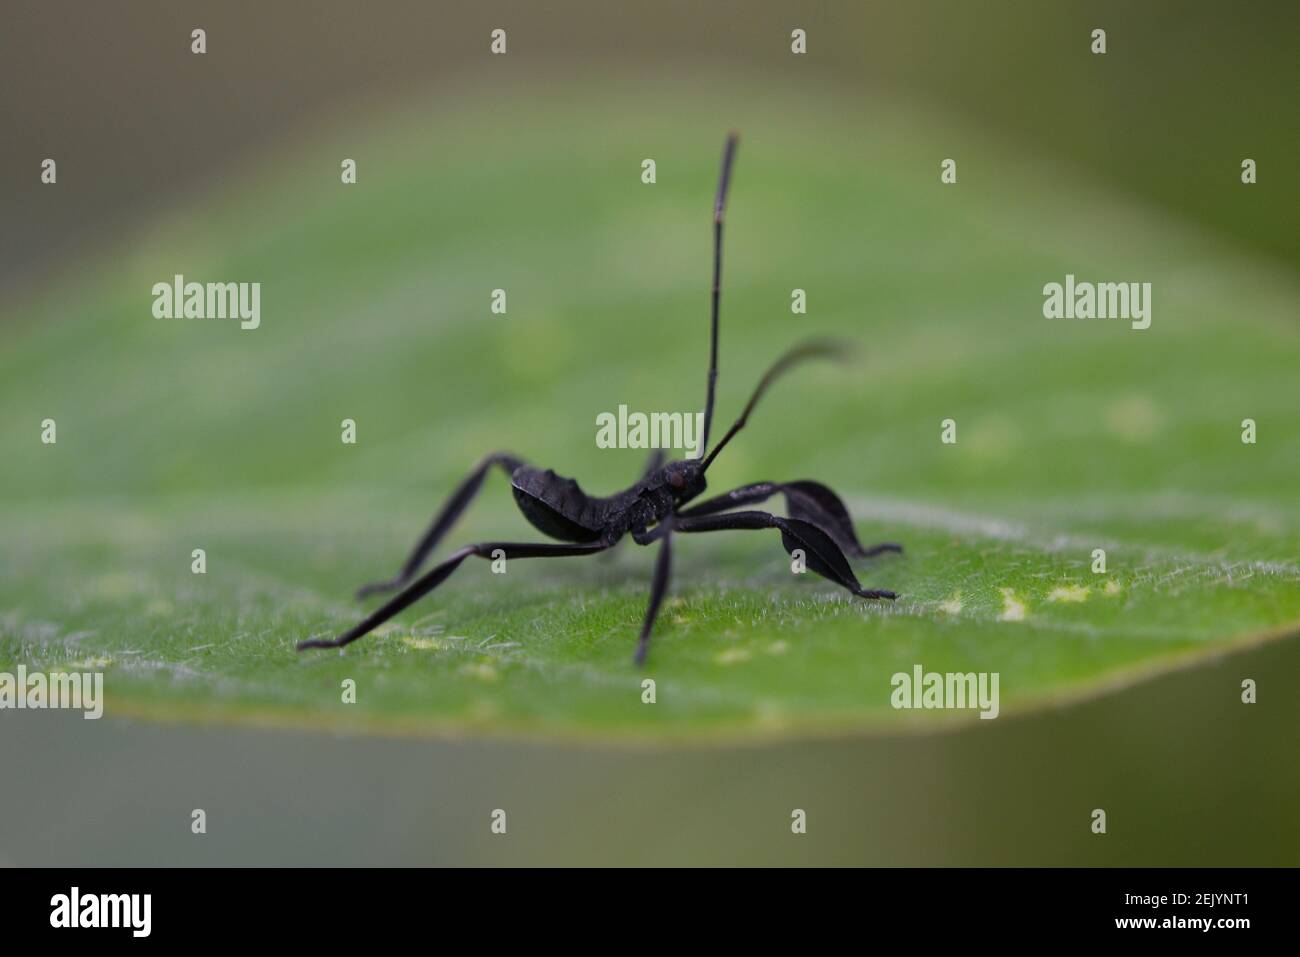 Hatchling Leaf-footed Bug, Coreidae Family, on leaf, Klungkung, Bali, Indonesia Stock Photo